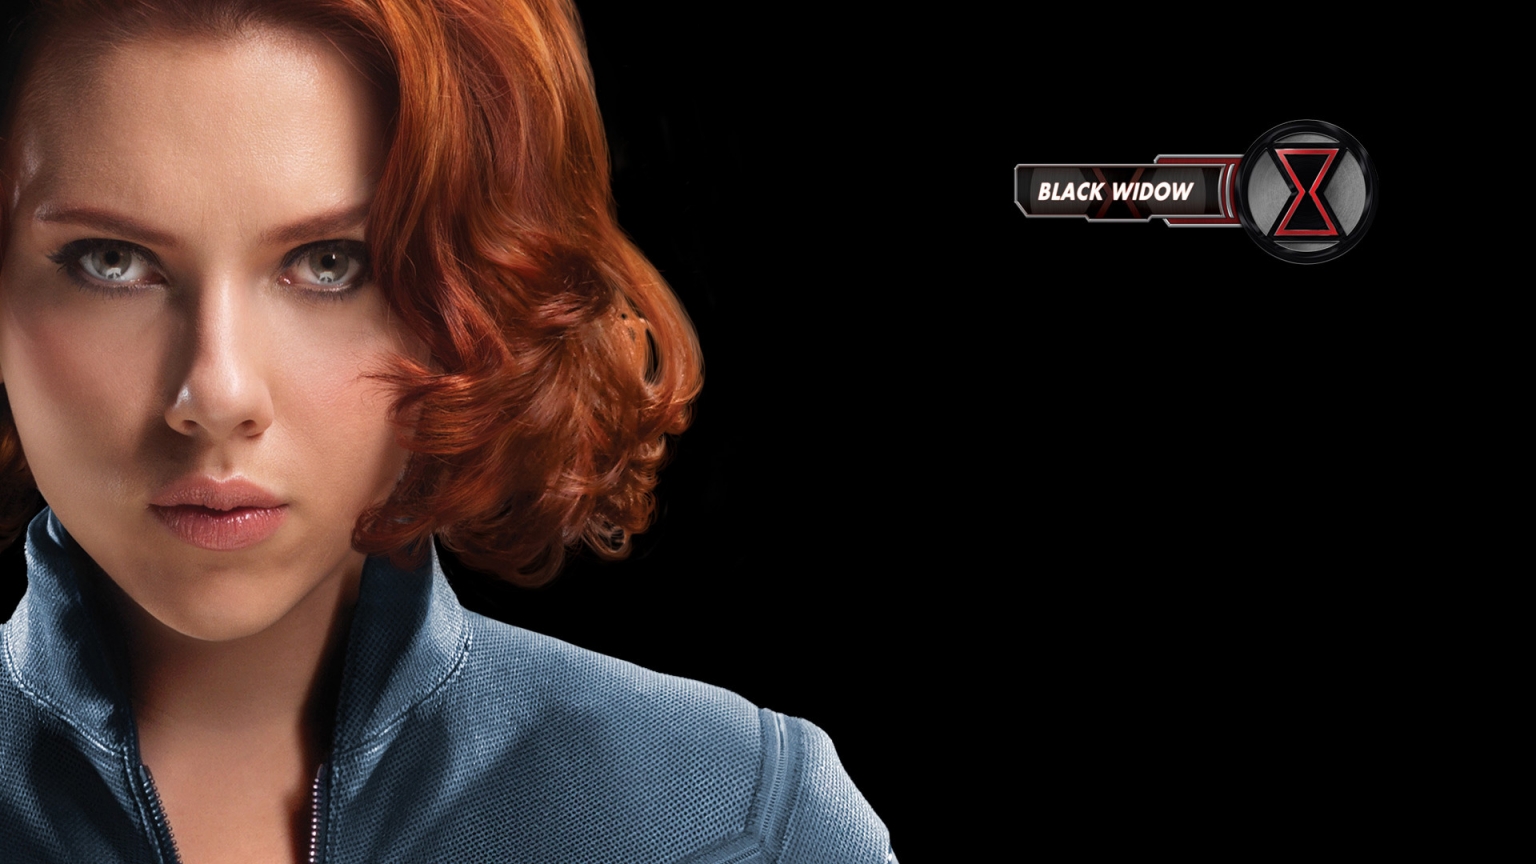 The Avengers Black Widow for 1536 x 864 HDTV resolution